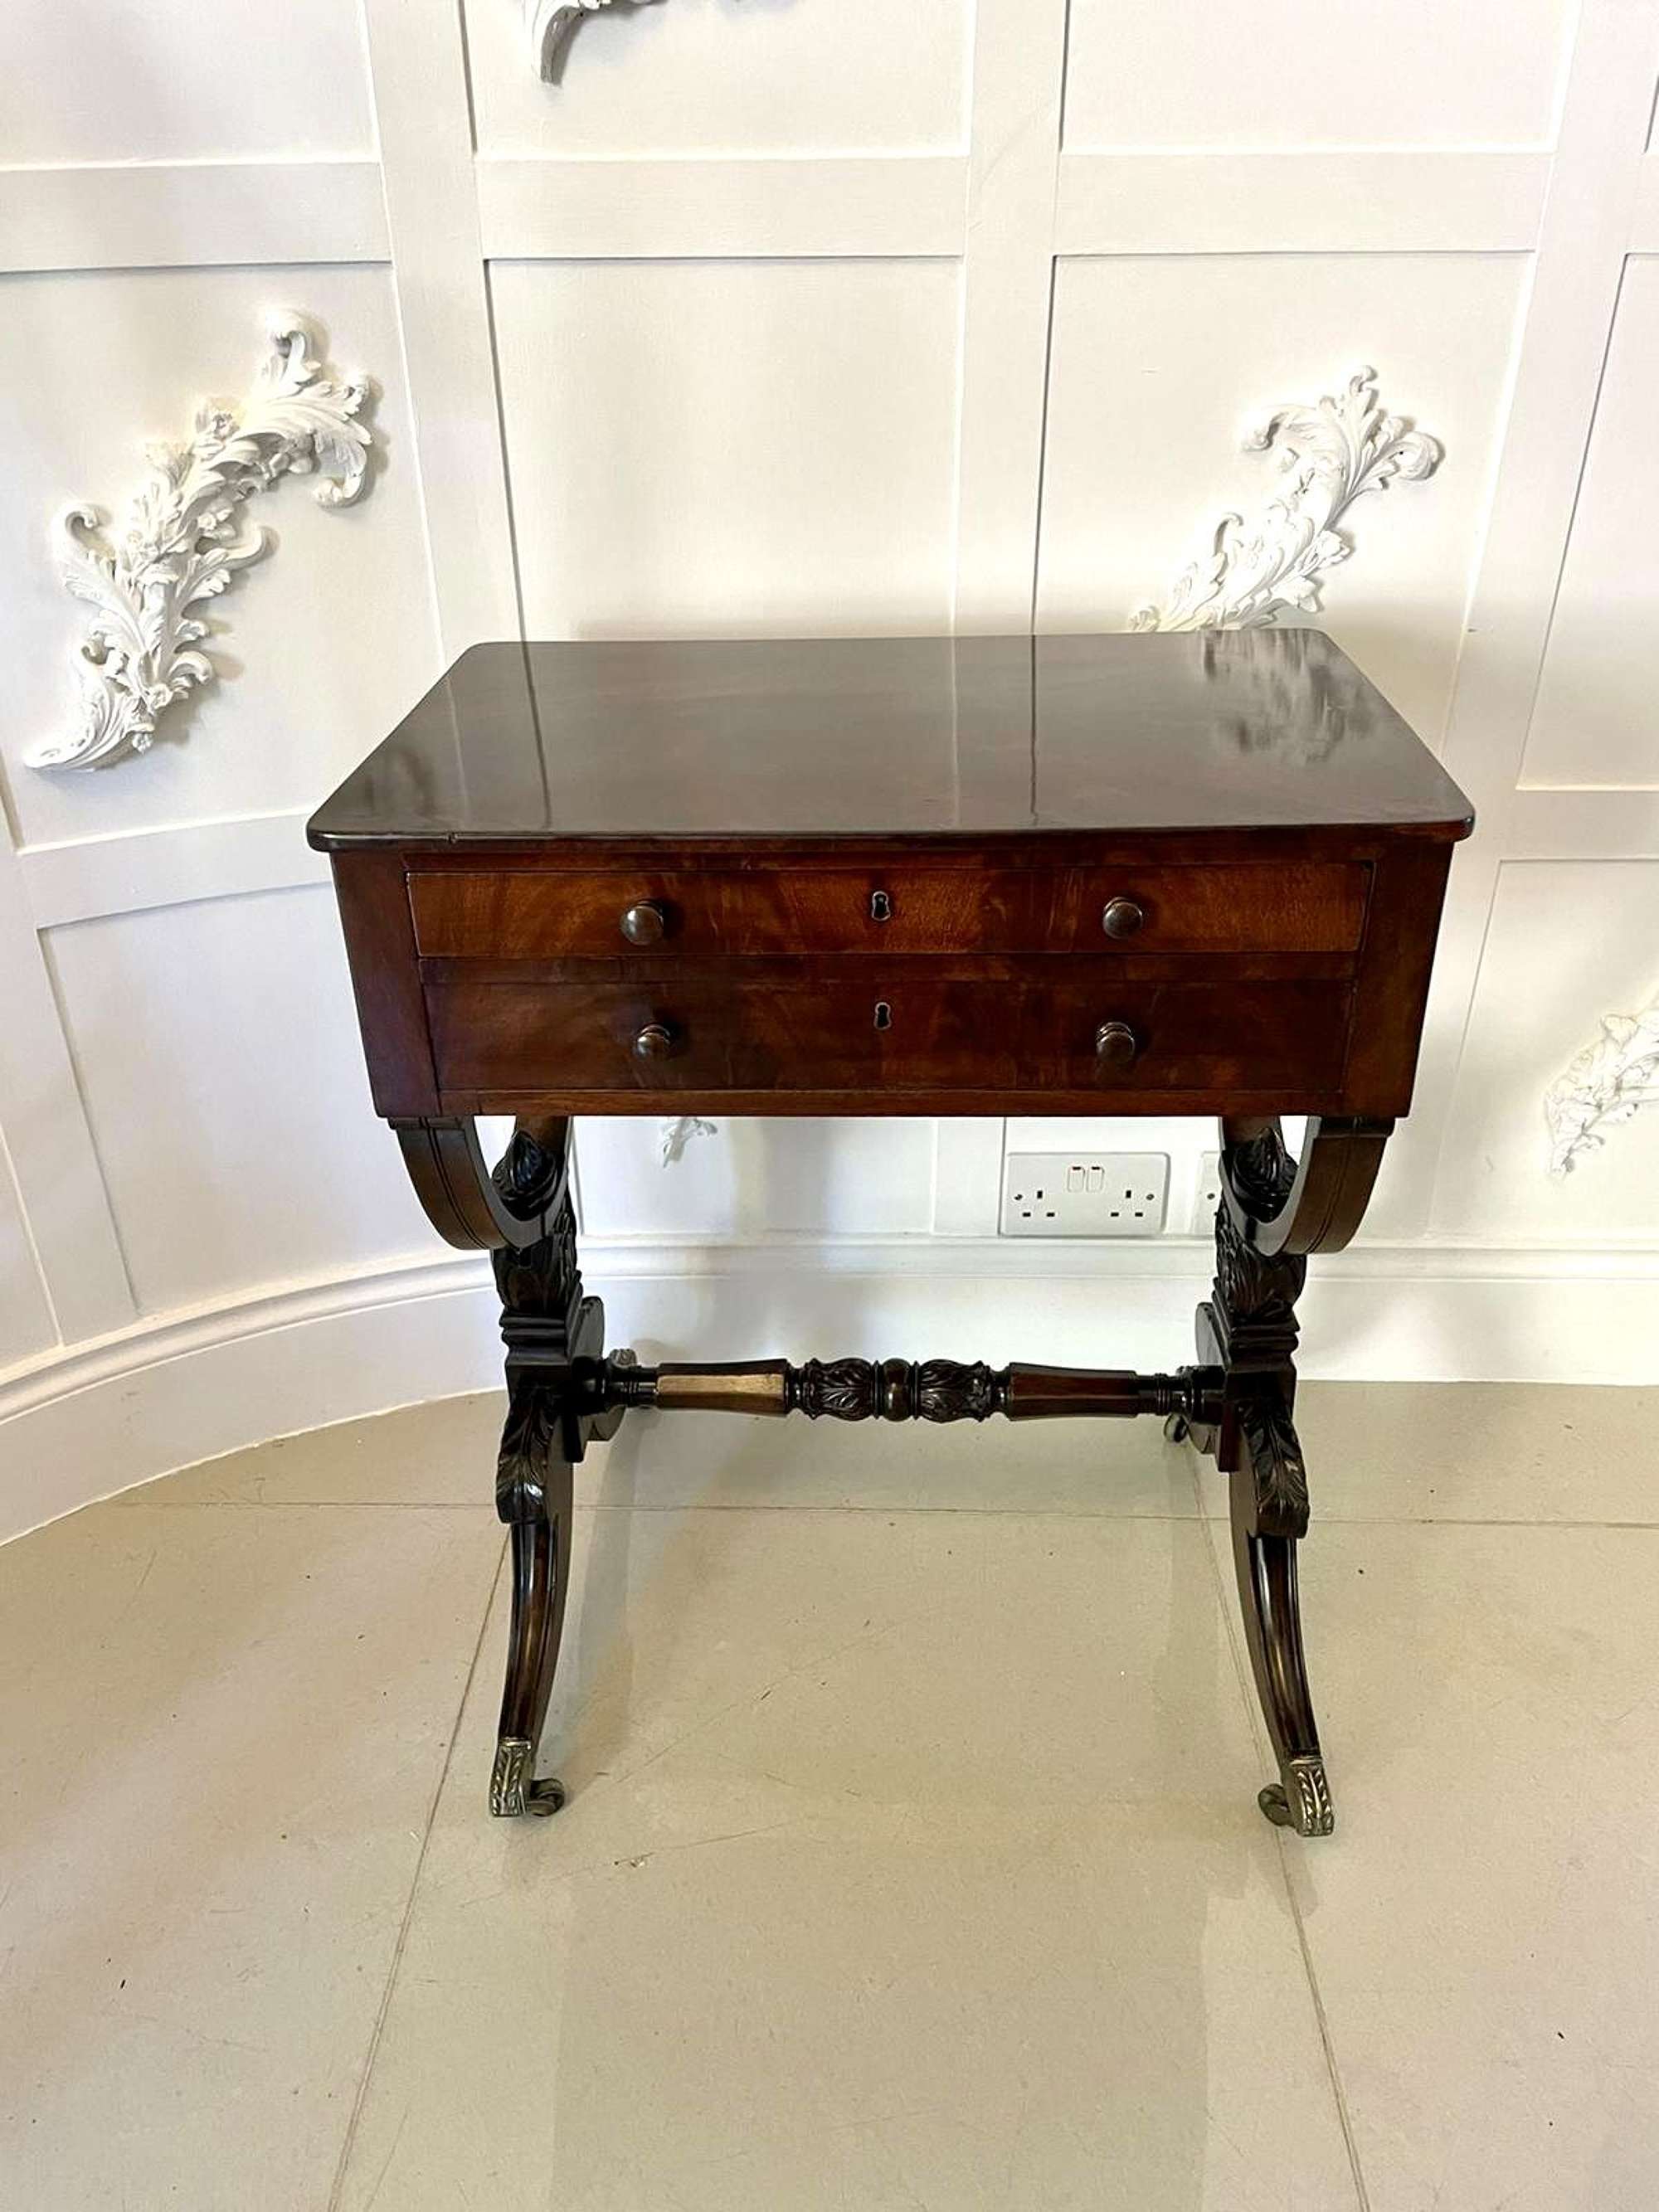 Unusual Outstanding Quality Antique Regency Freestanding Figured Mahogany Centre Table